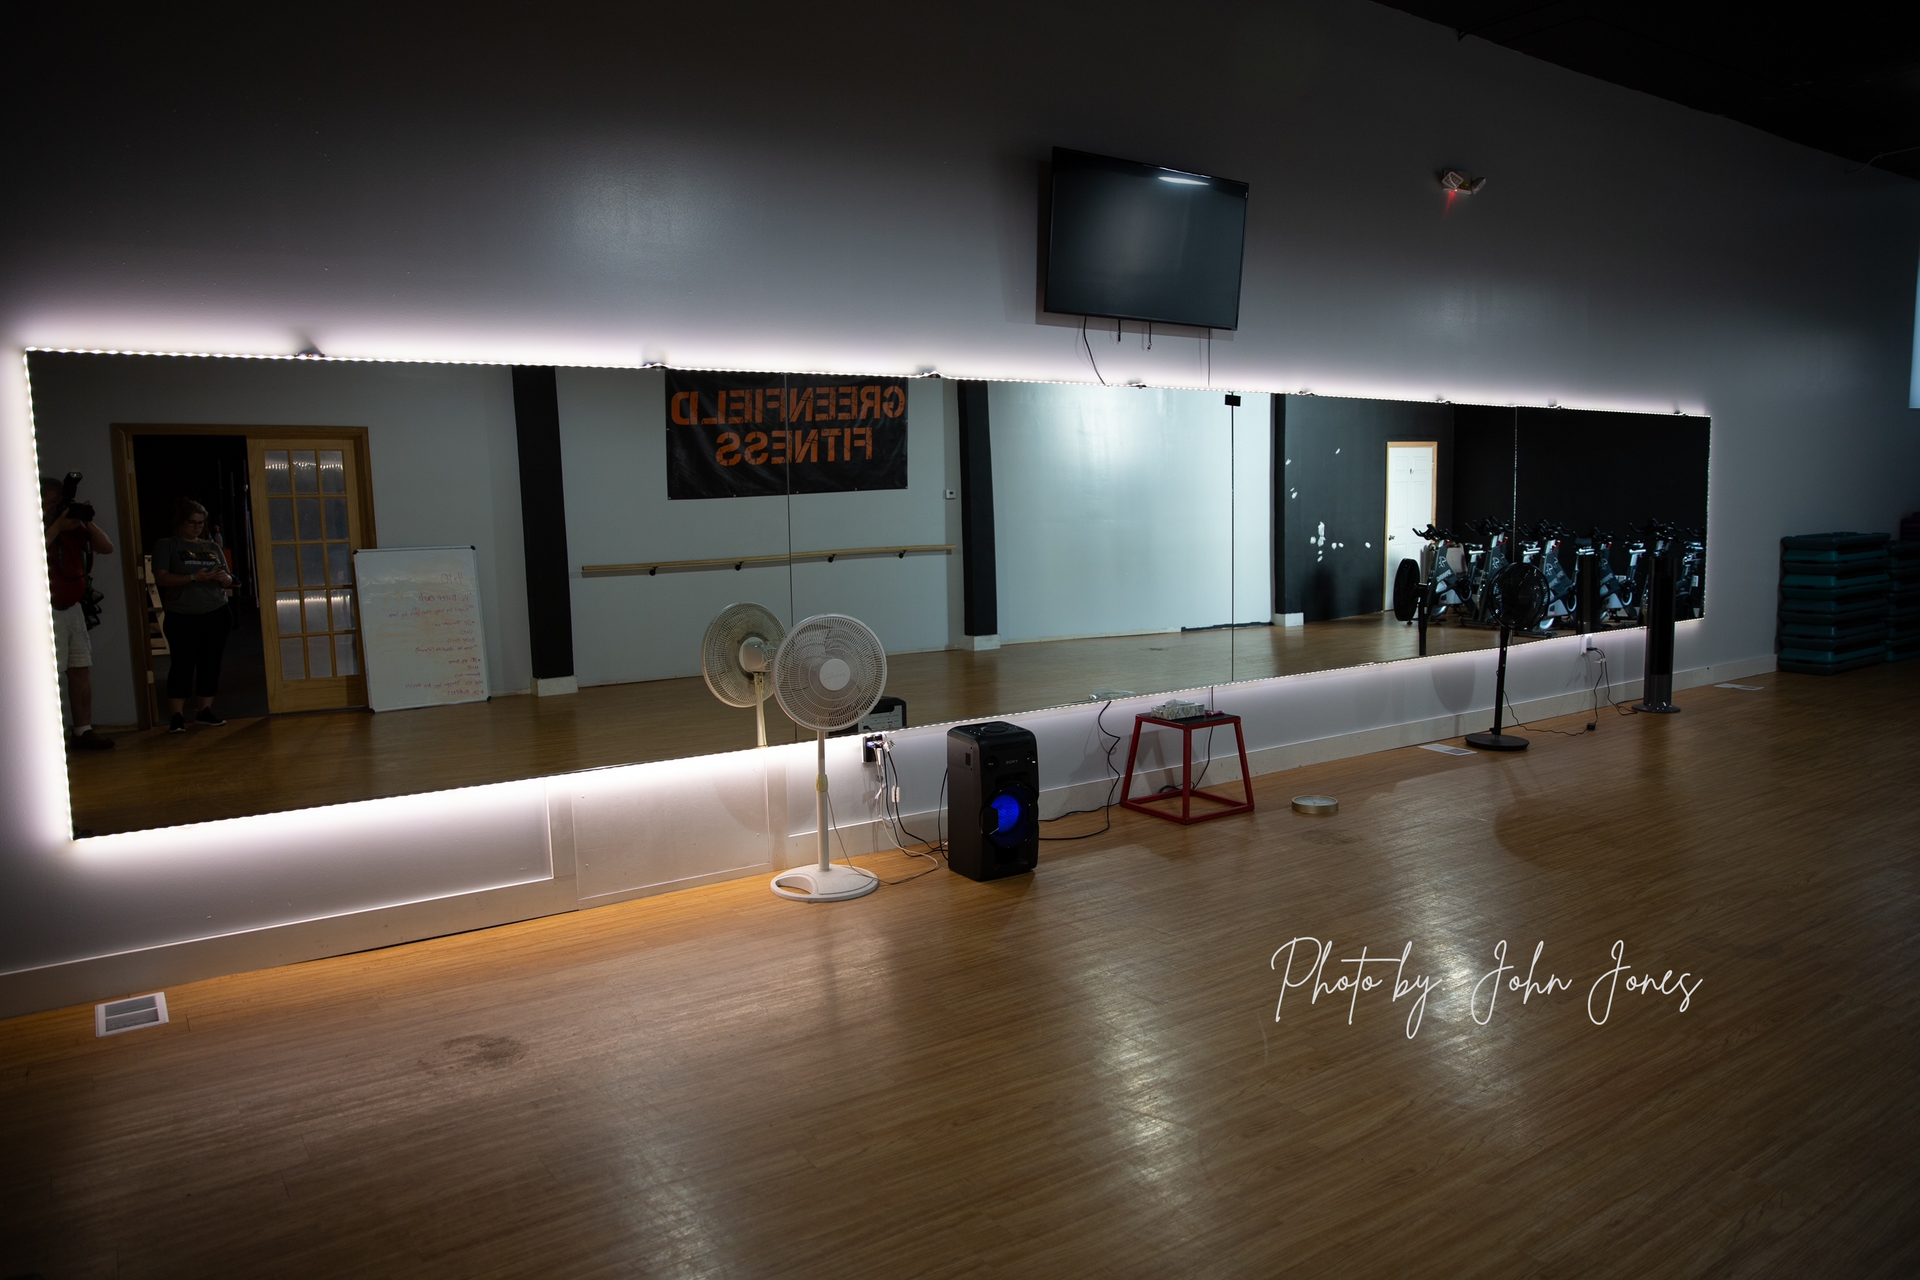 A dance studio with a large mirror and a sign that says ' it 's a workout ' on it